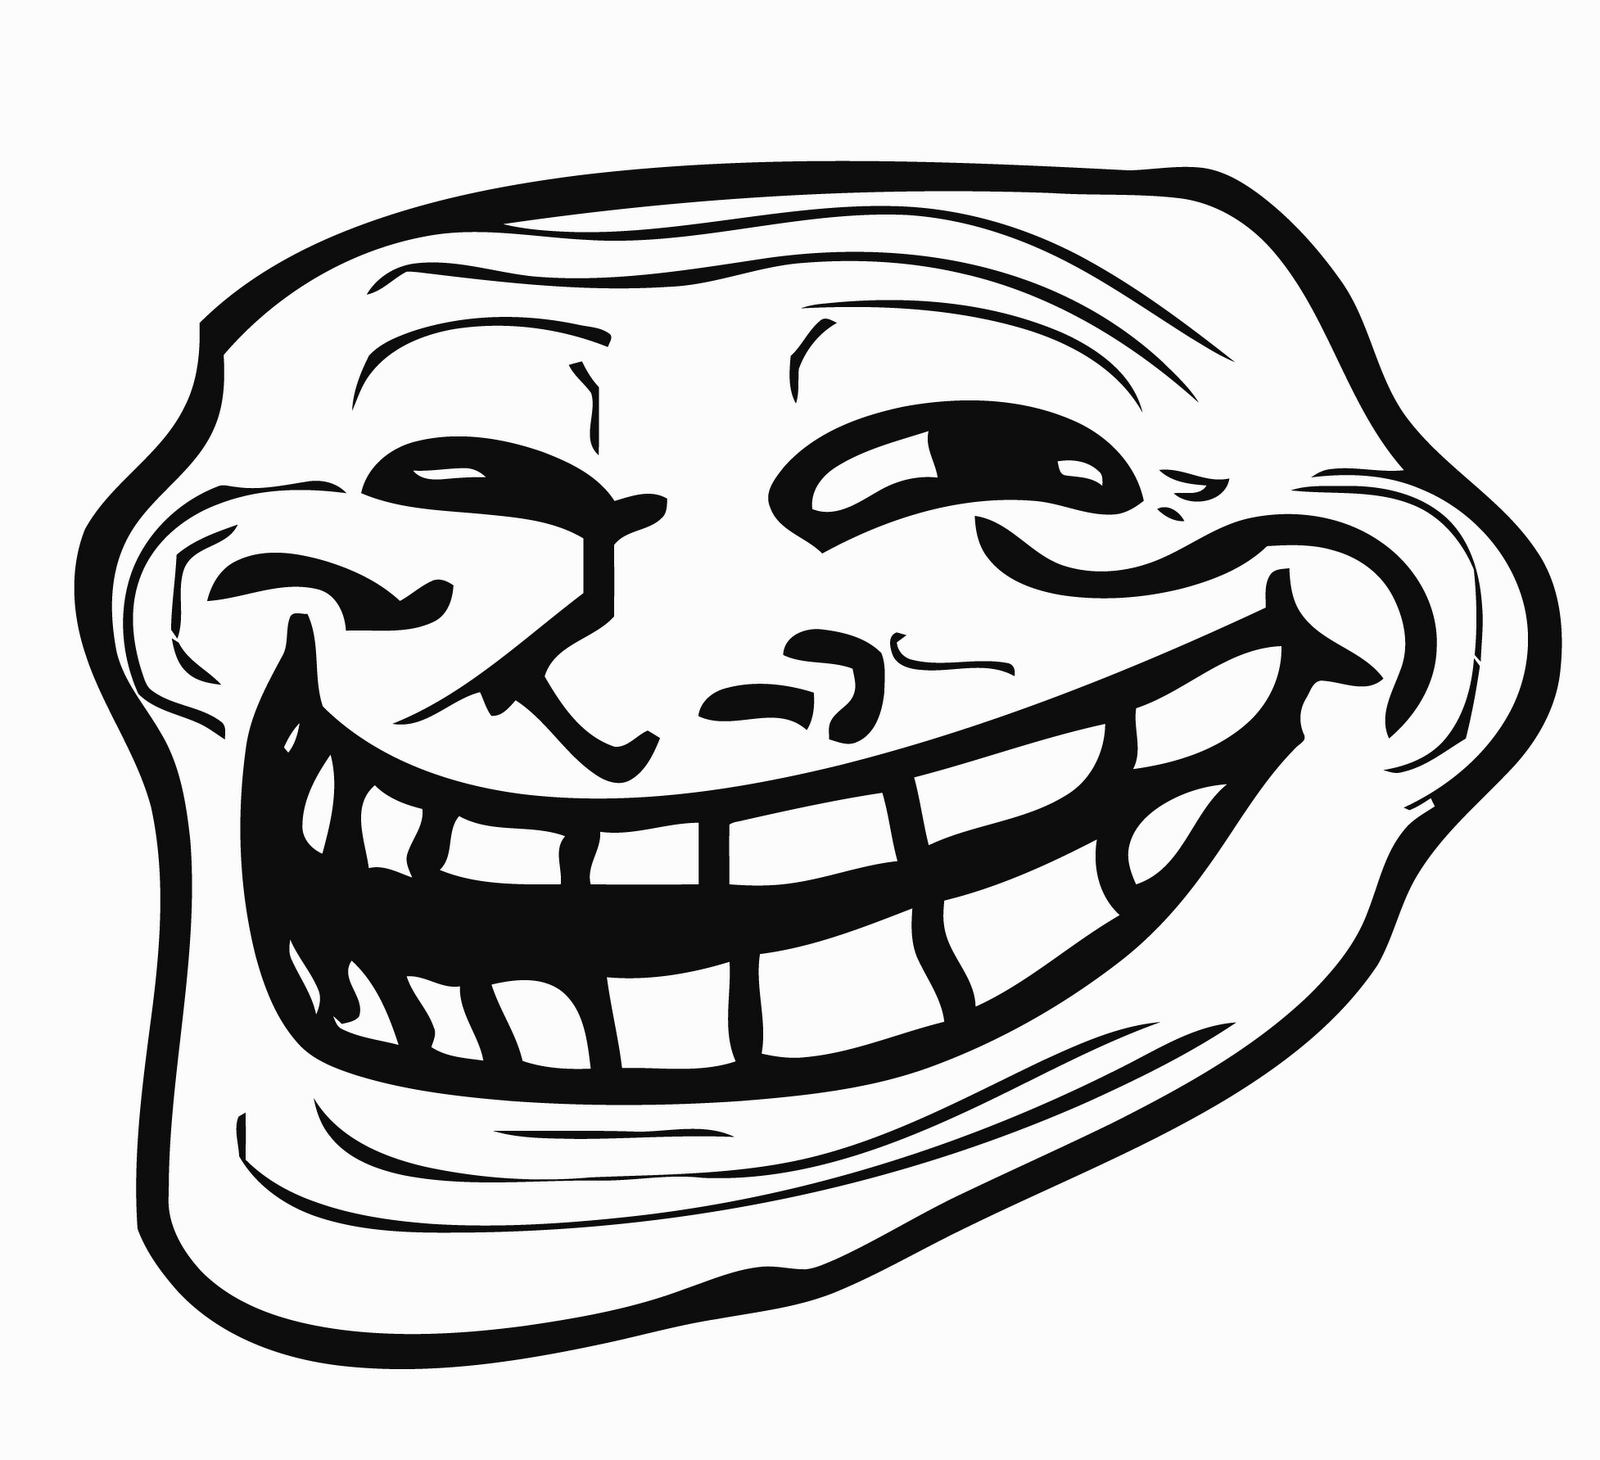 Trollface_More_HD.png